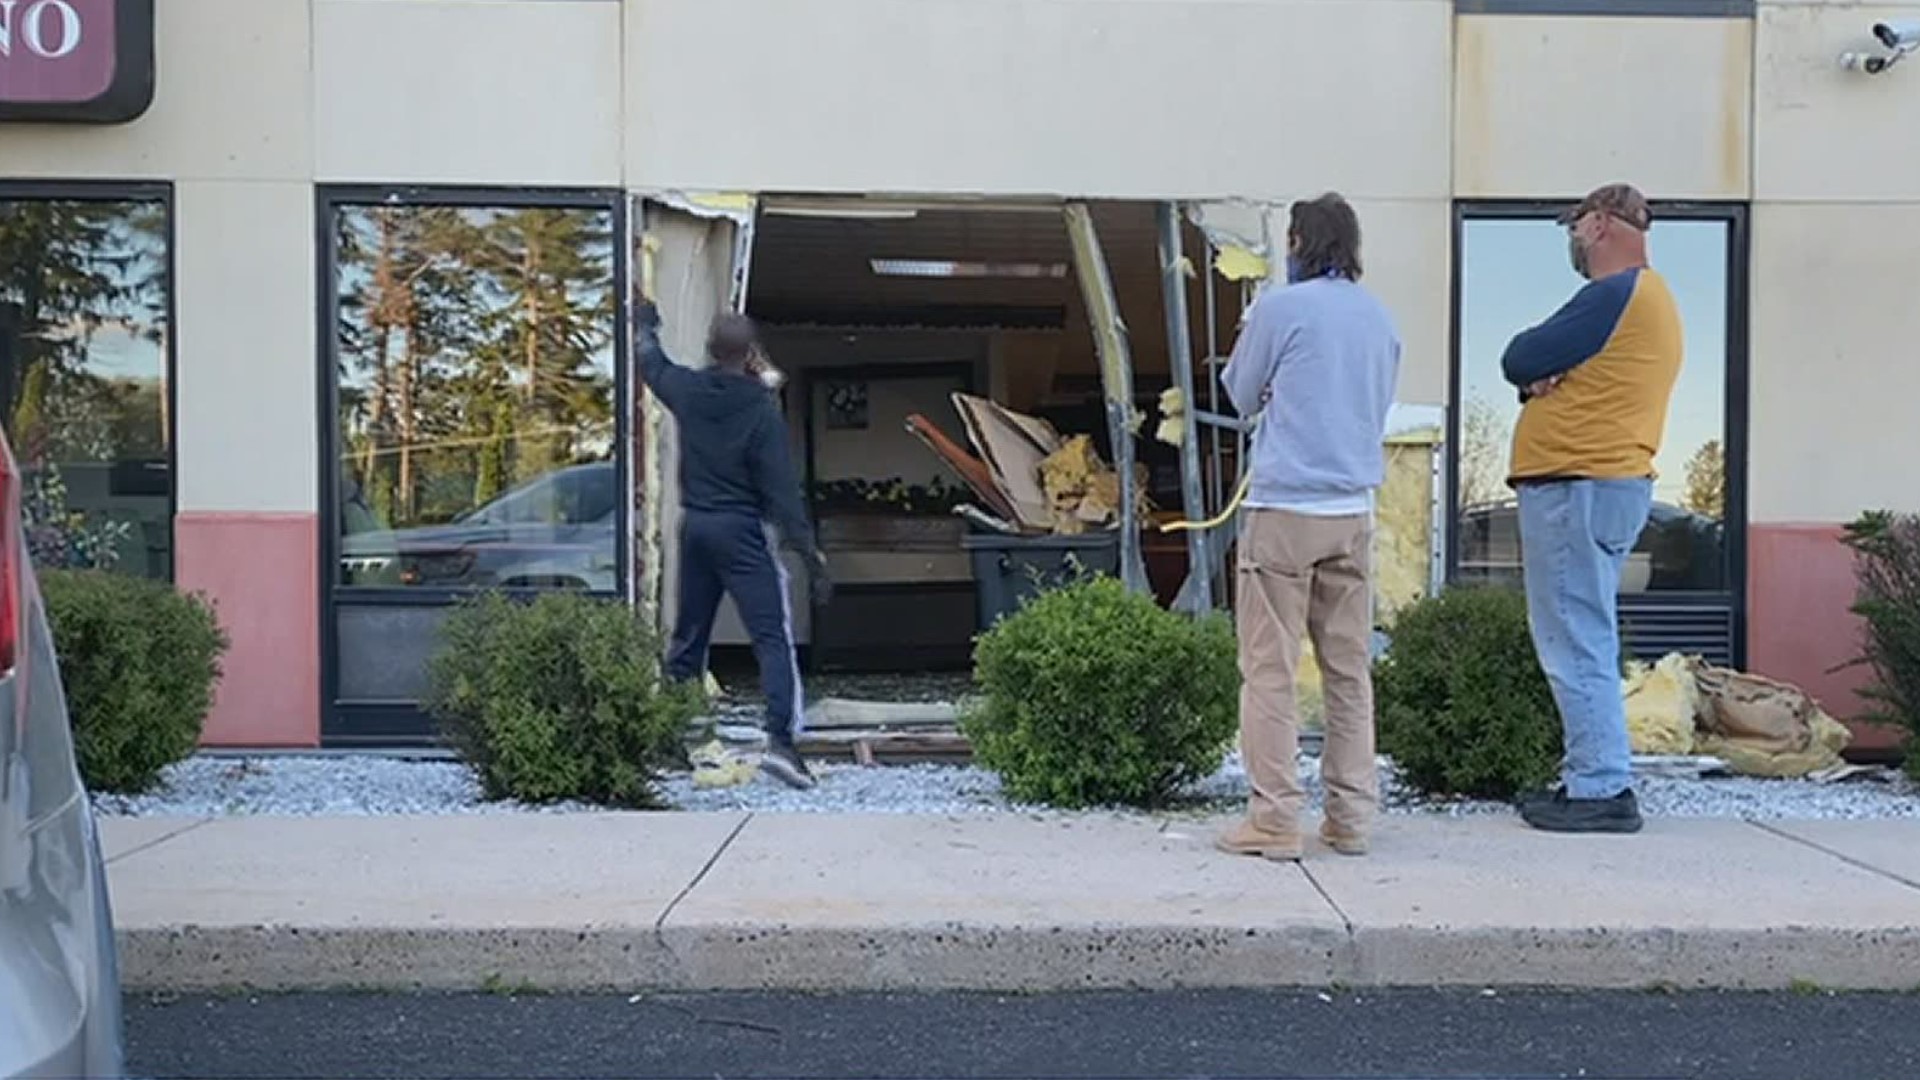 Authorities say a male driver didn't think he was in drive, hit the gas, and went right through the wall of Hotel M along Pocono Boulevard in Mount Pocono.